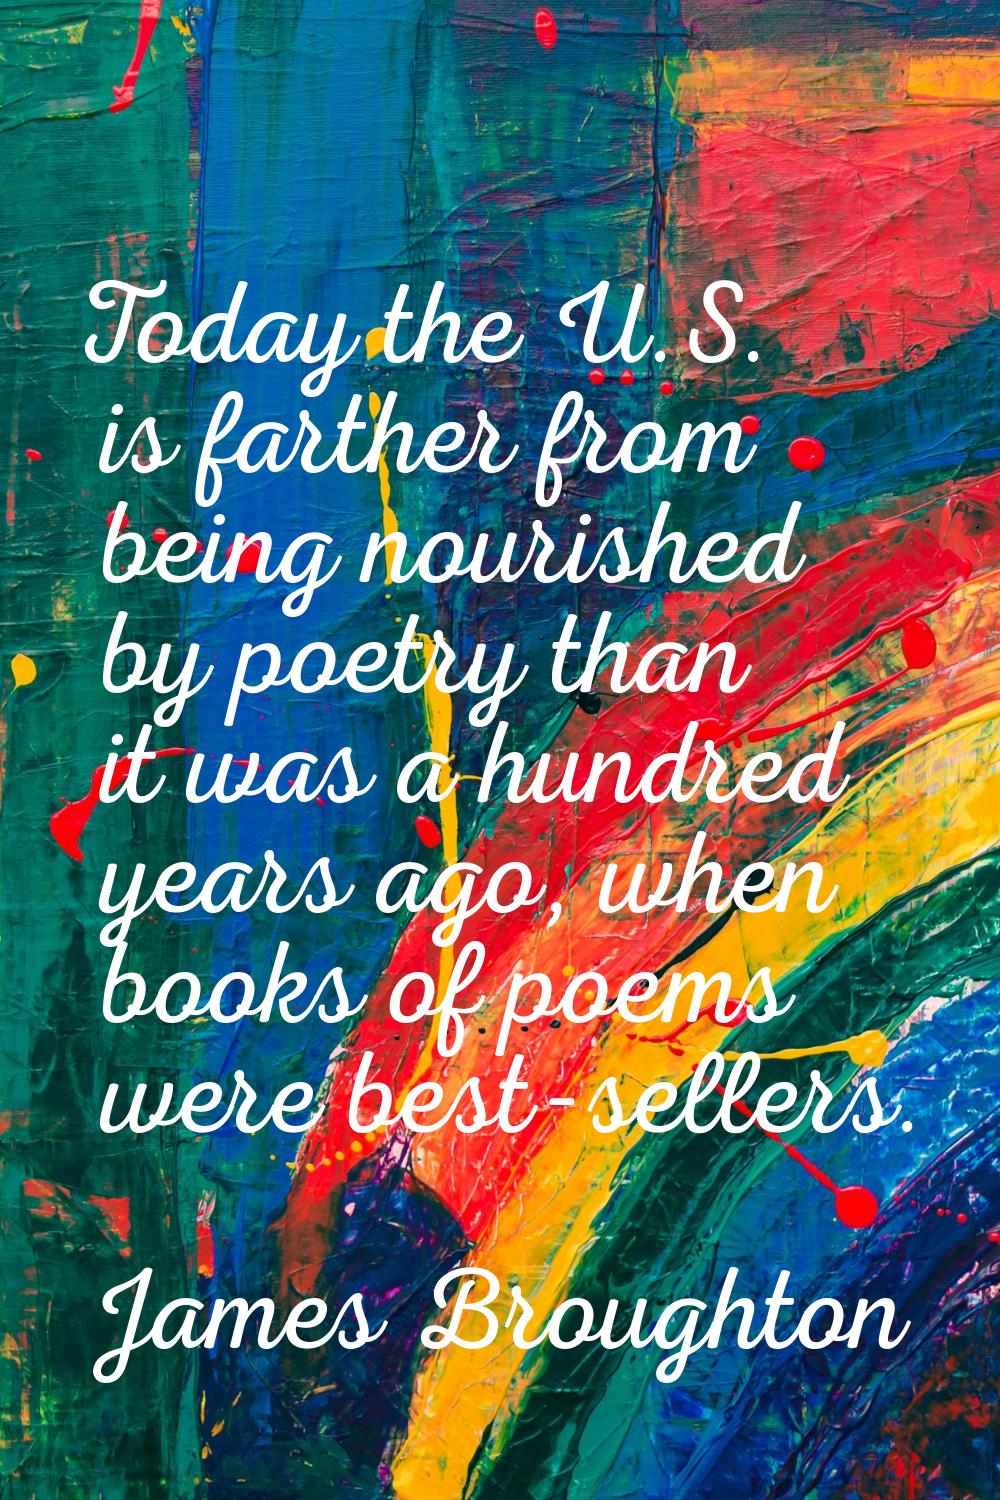 Today the U.S. is farther from being nourished by poetry than it was a hundred years ago, when book